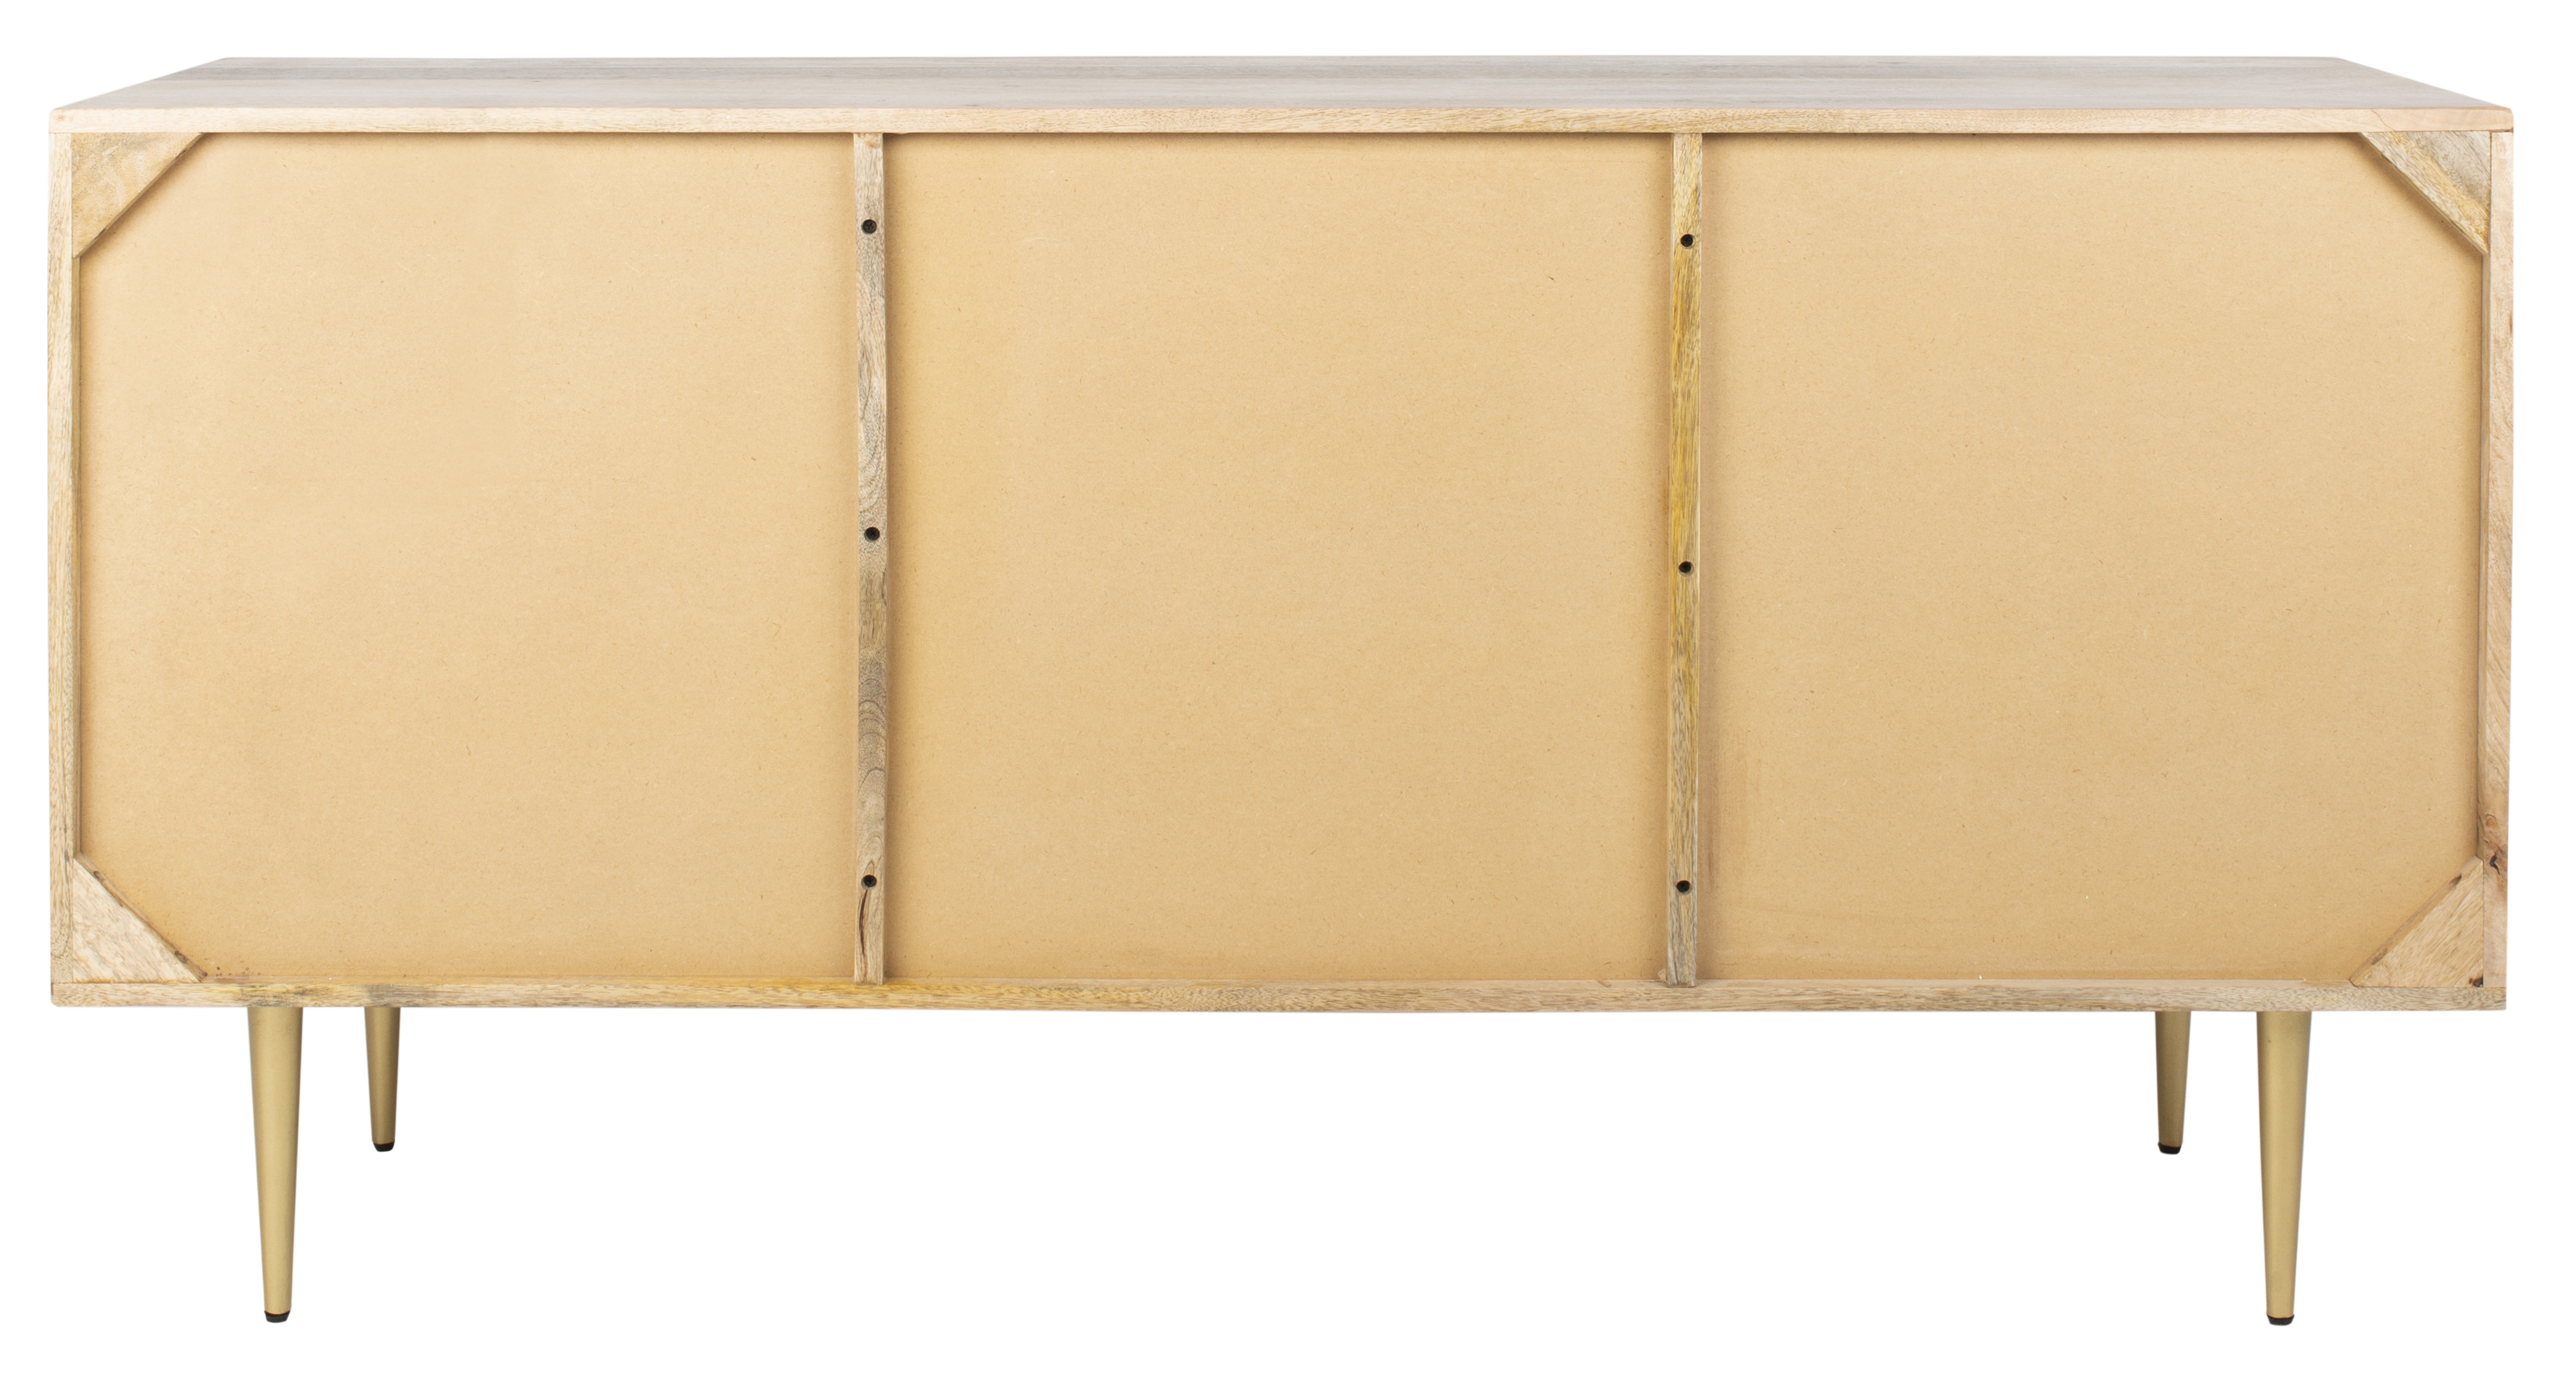 Titan Gold Inlayed Cement Sideboard - Natural Mango/Brass/Cement - Arlo Home - Image 4